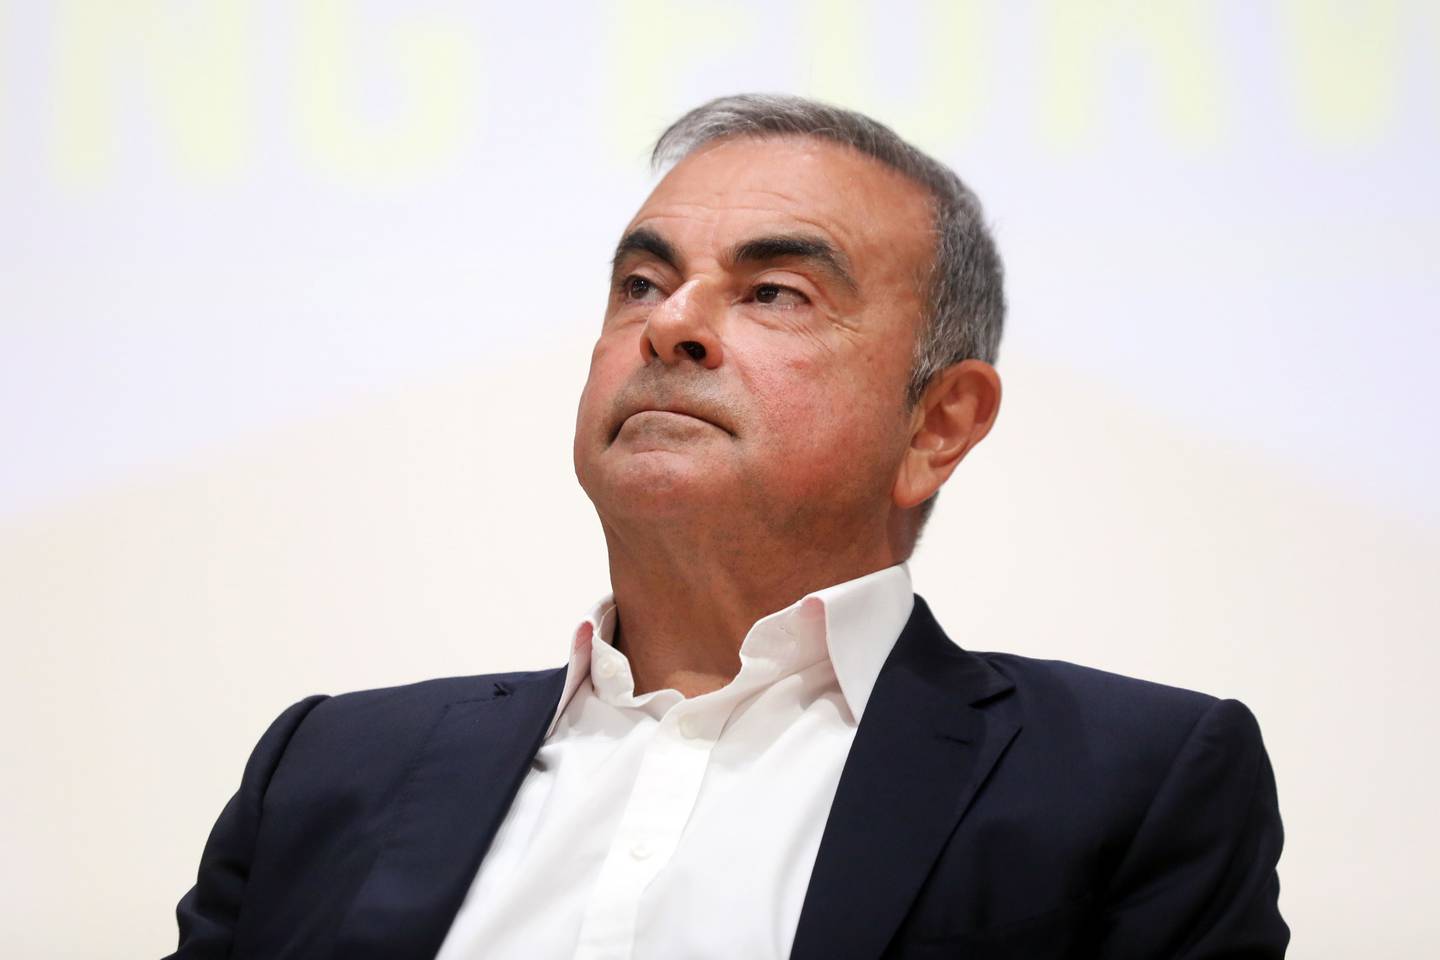 Carlos Ghosn, former Nissan chief executive officer, pauses during a news conference at the Holy Spirit University of Kaslik (USEK) in Jounieh, Lebanon, on Tuesday, Sept. 29, 2020.